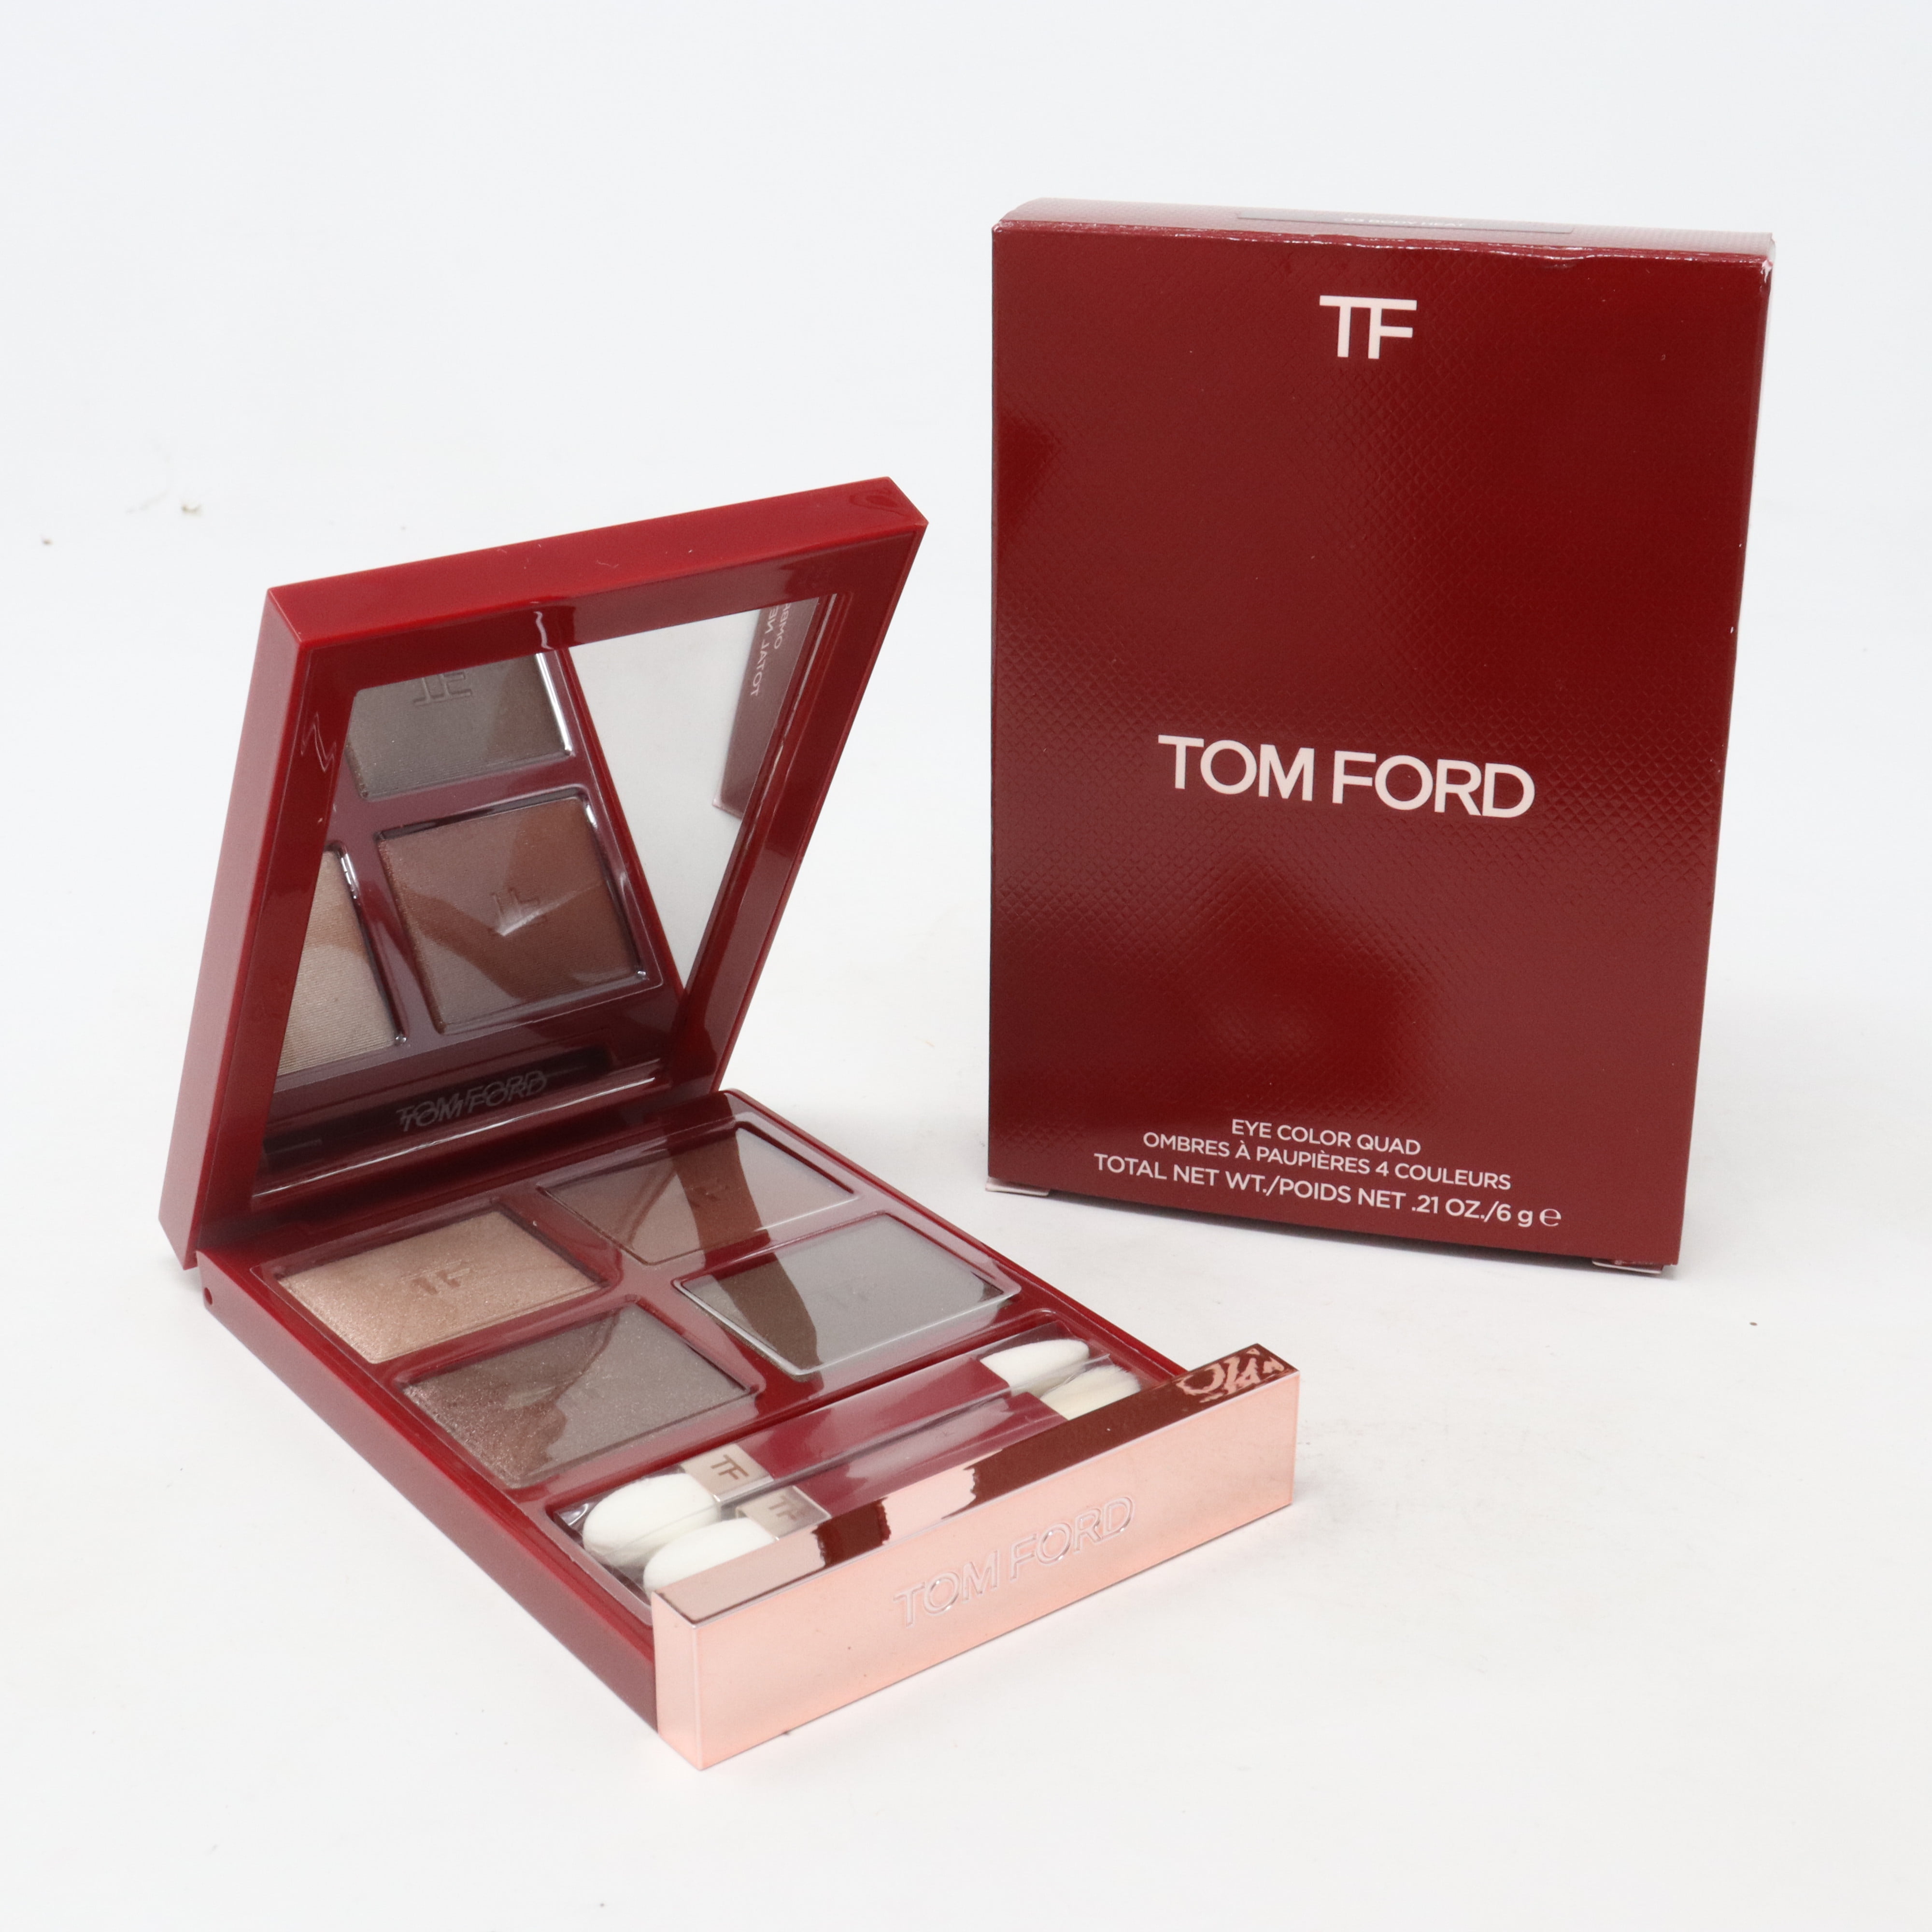 Tom Ford Eye Color Quad 03 Body Heat /6g New With Box 